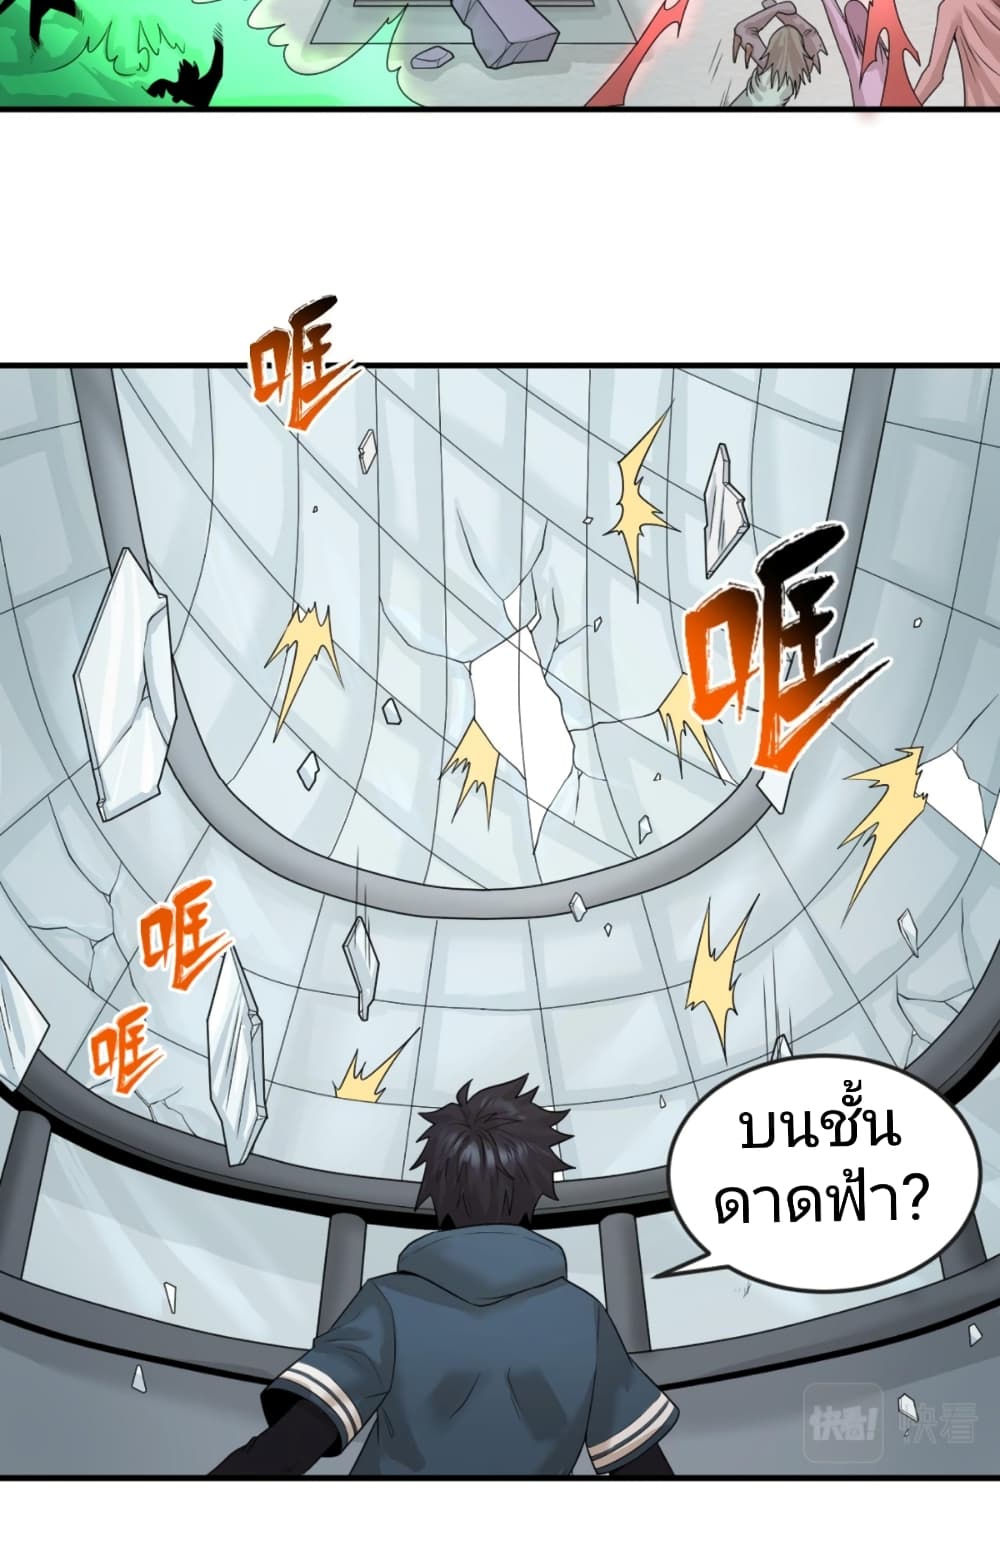 The Age of Ghost Spirits à¸à¸­à¸à¸à¸µà¹ 34 (6)